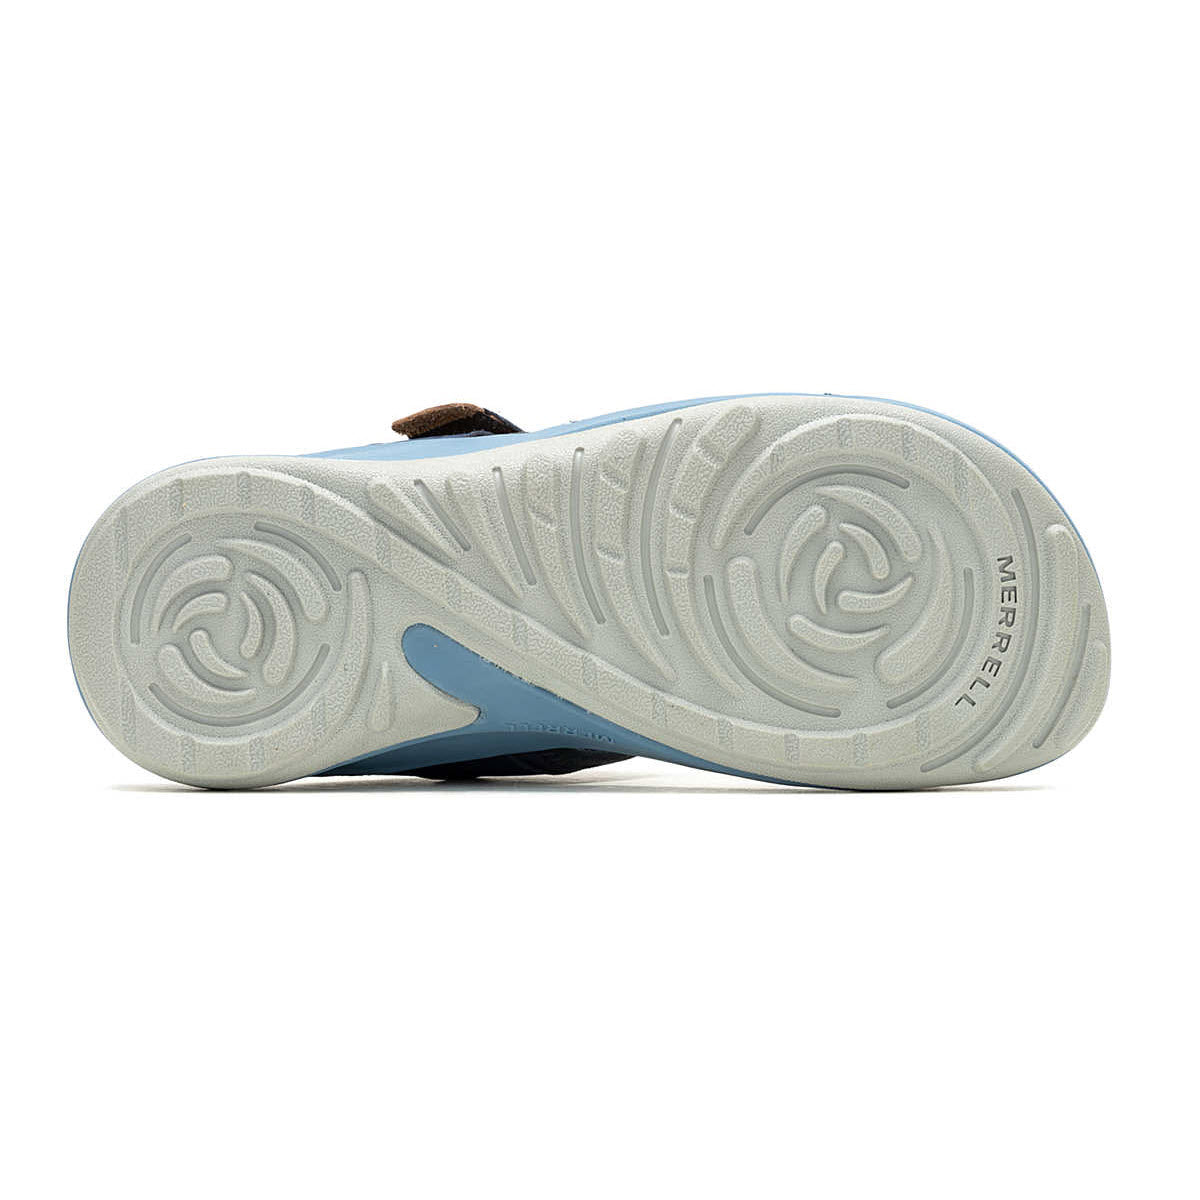 Bottom view of a Merrell Terran 4 Post Sea - Womens shoe showing a detailed tread pattern with circular designs on a beige sole and a blue accent.